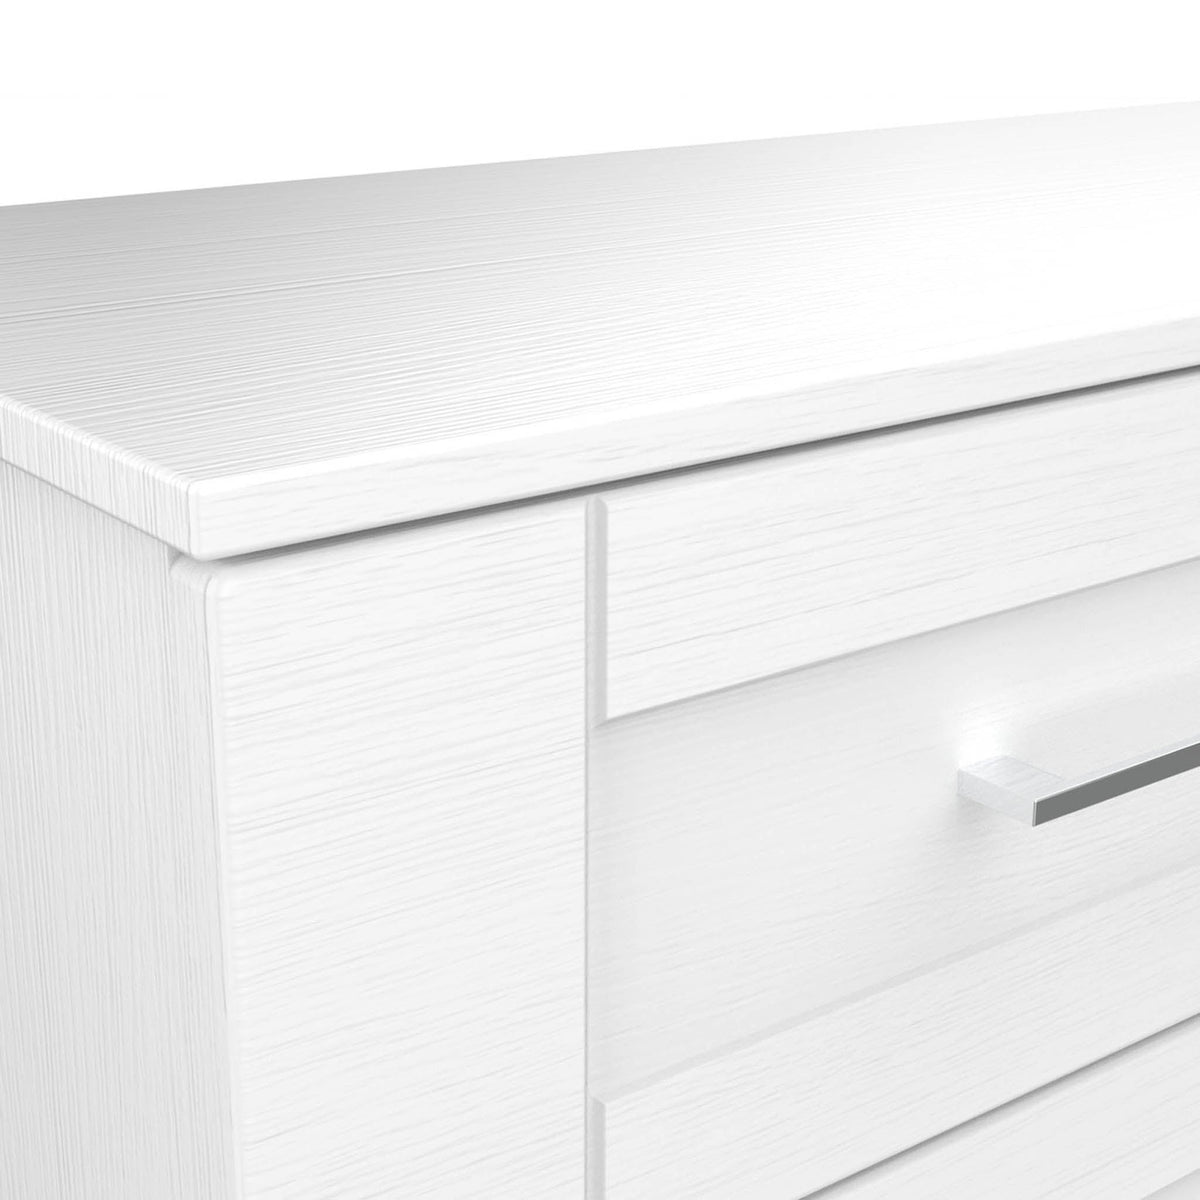 Bellamy White 3 Drawer Compact Dressing Table wood grain close up